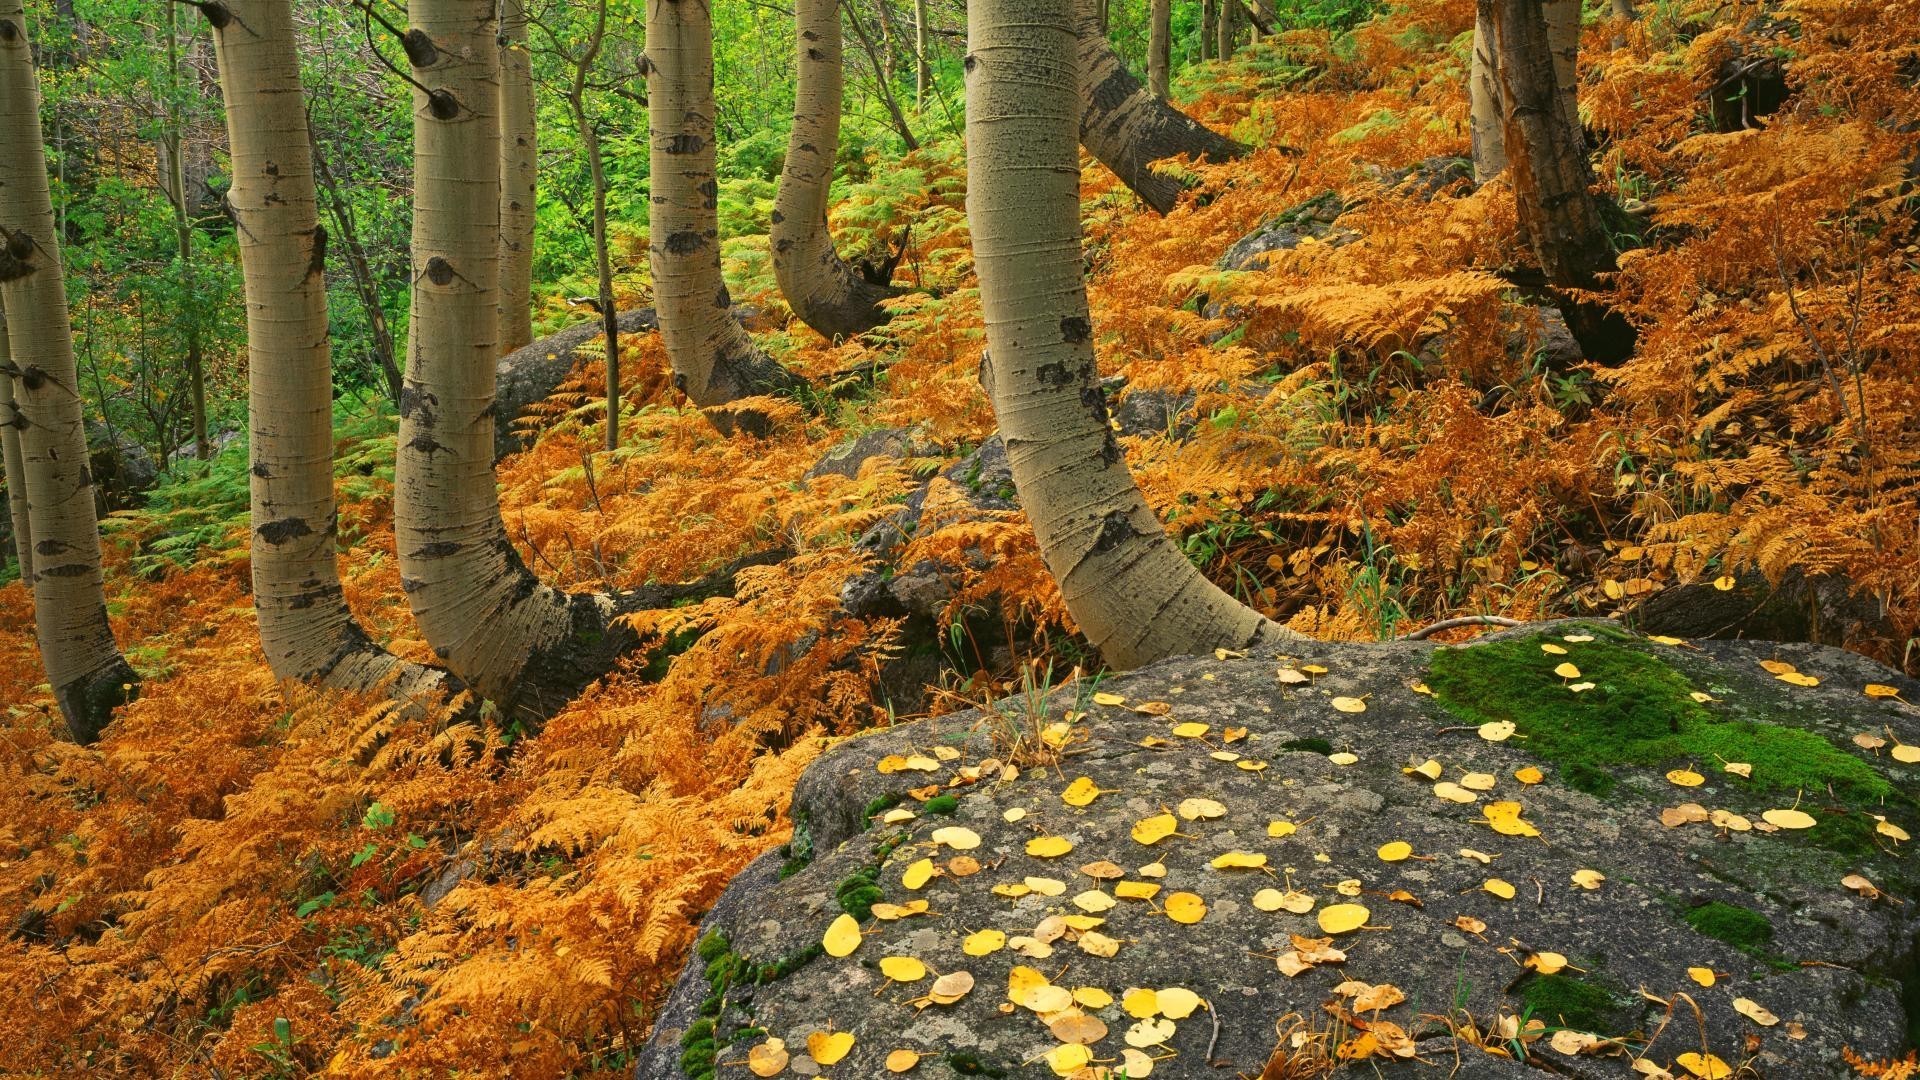 1920x1080 Rocky Tag - Landscapes Rocky Colorado Autumn National Park Ferns Nature Hd  Wallpaper For Android Phone